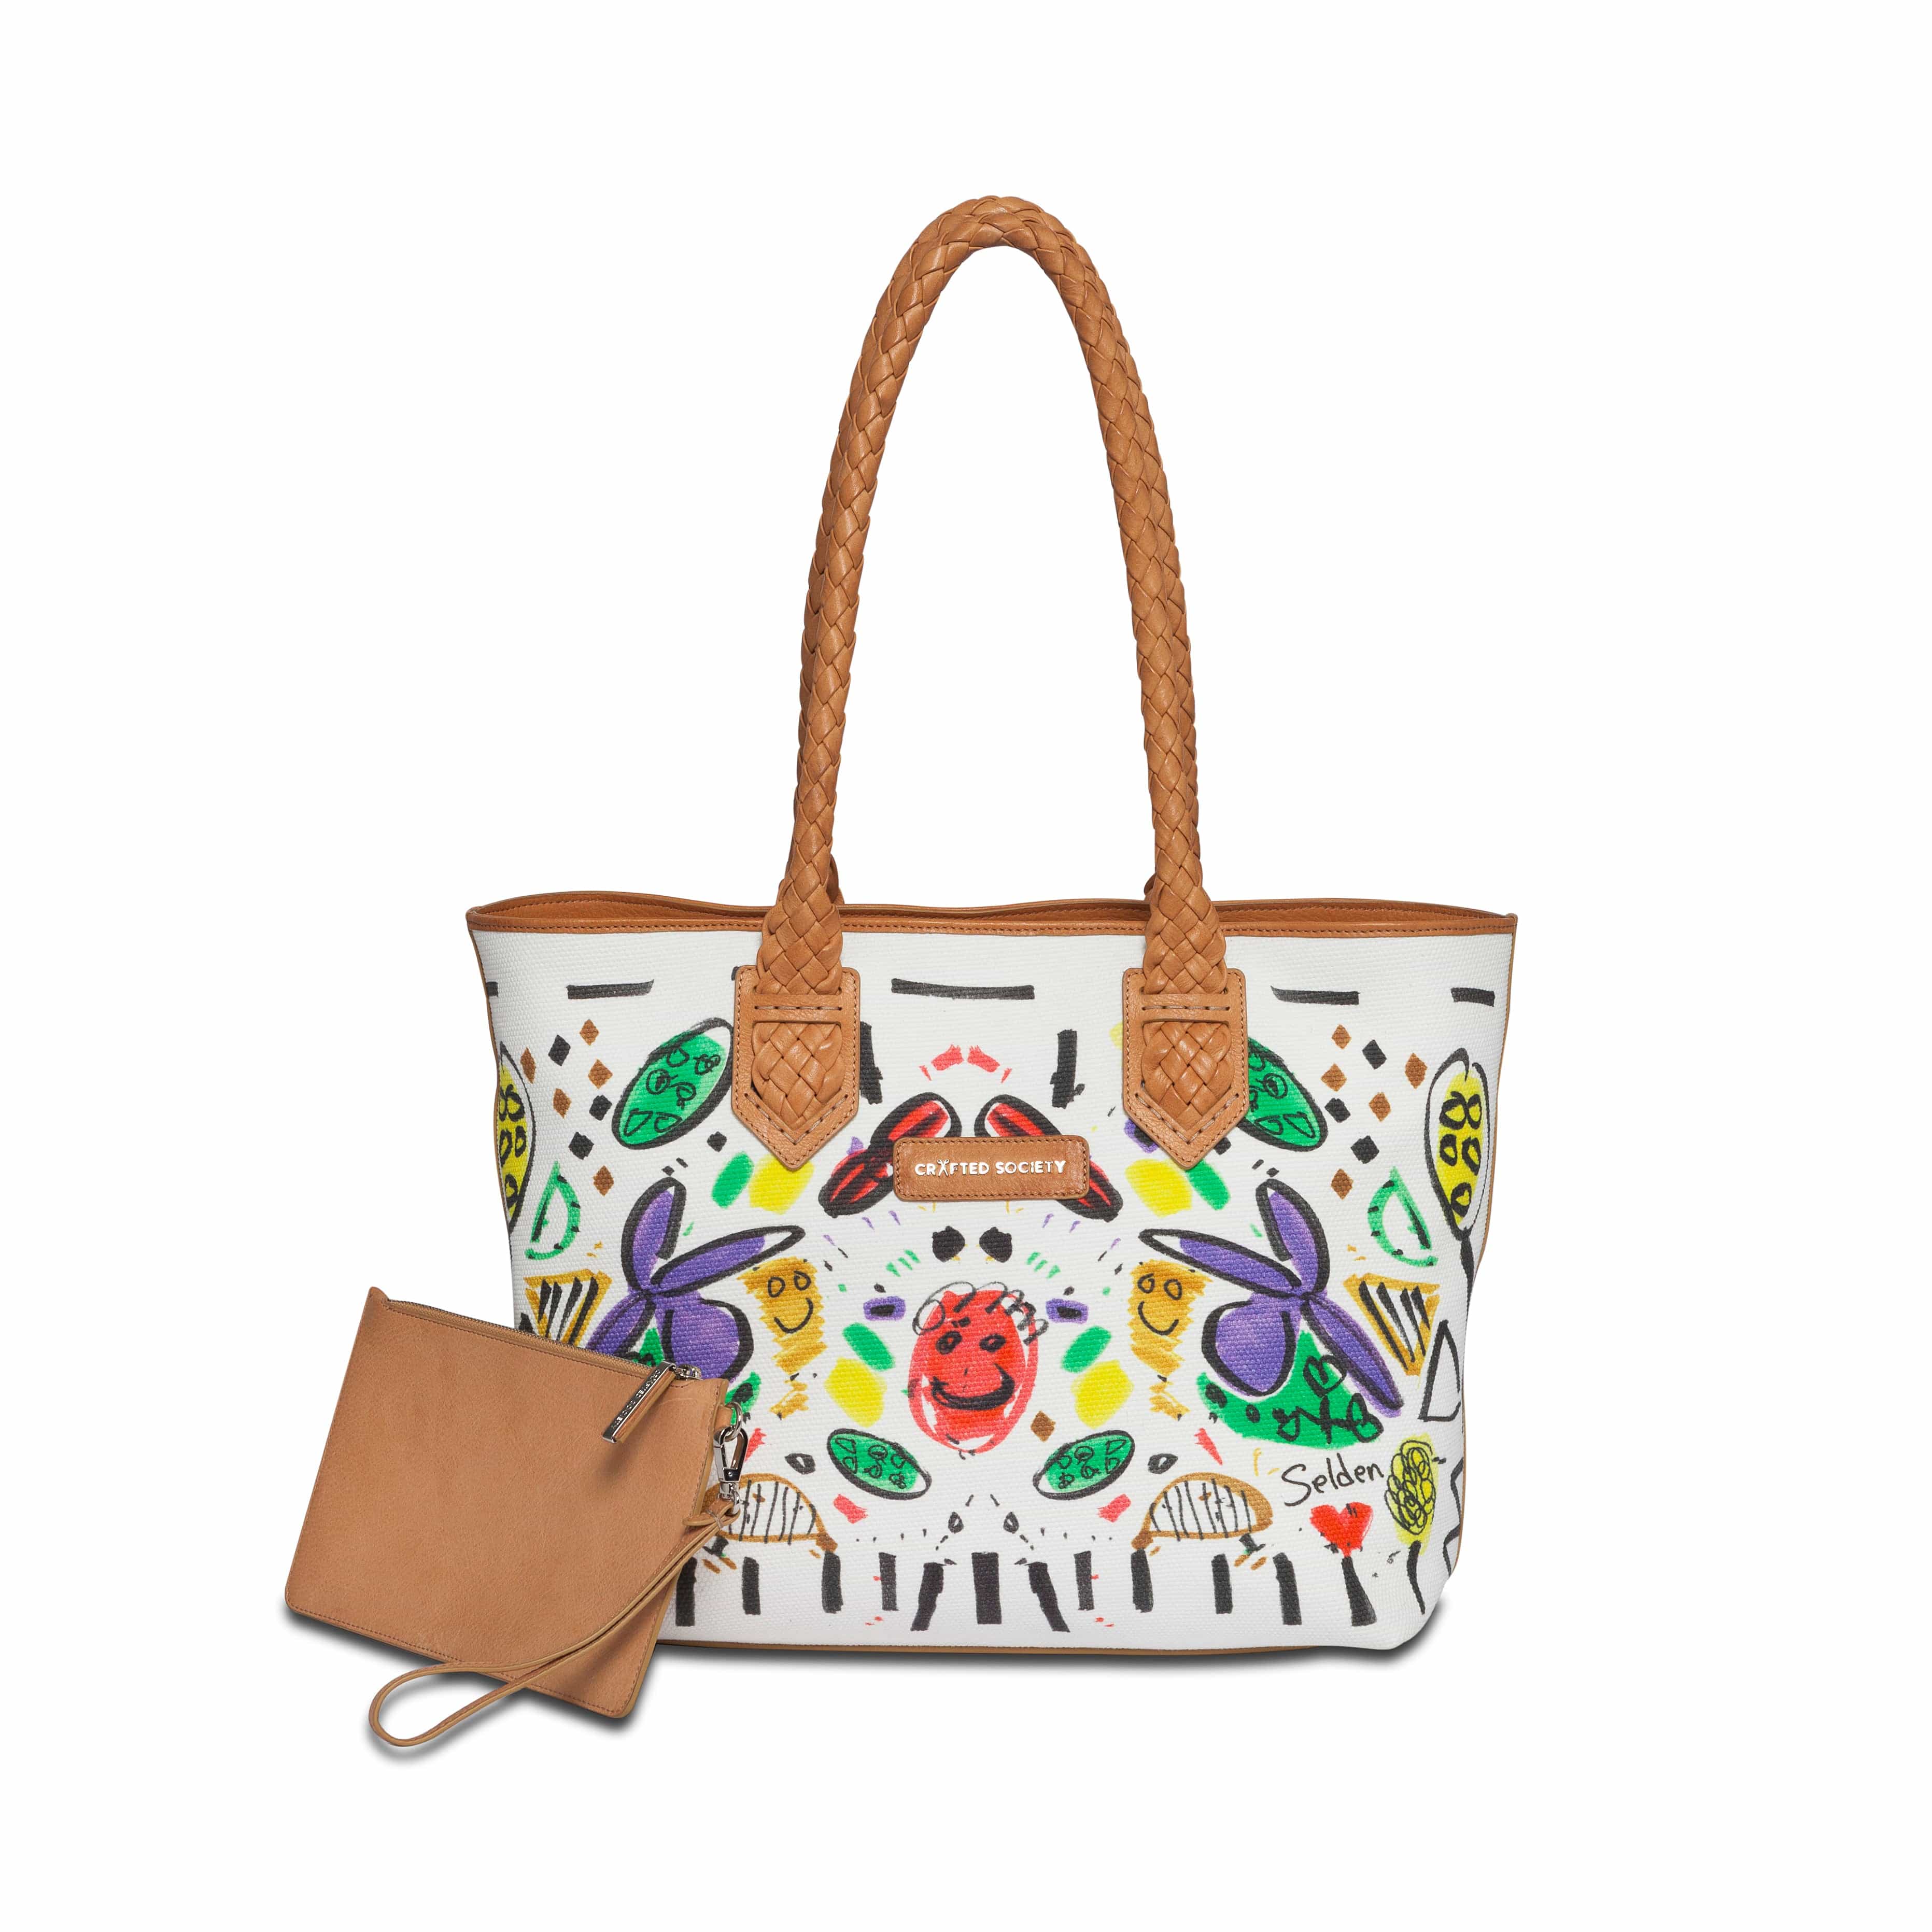 Tote - Selden Art Canvas & Vachetta Leather | Made in Italy